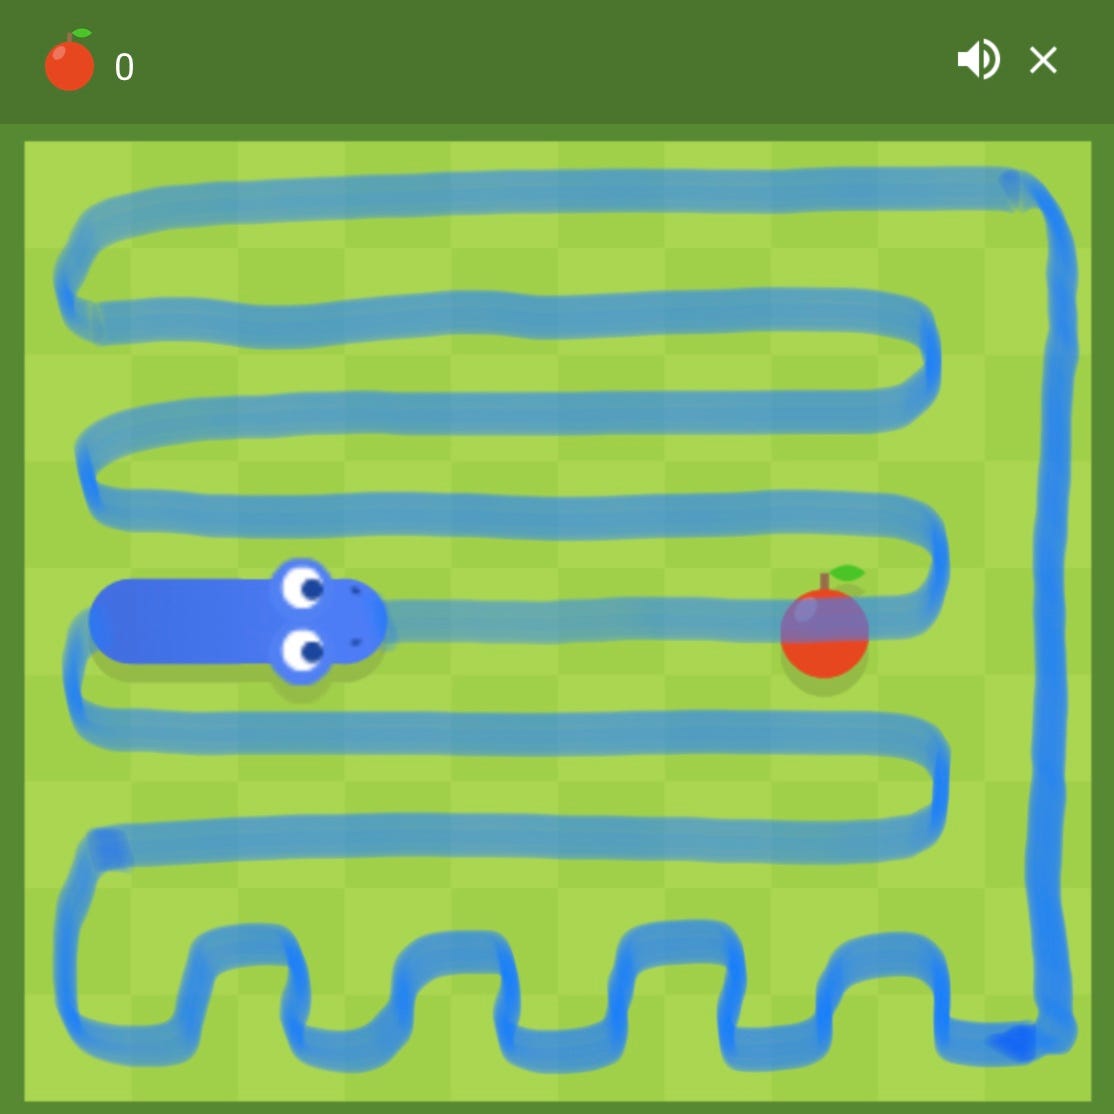 Is there a way to win snake game?